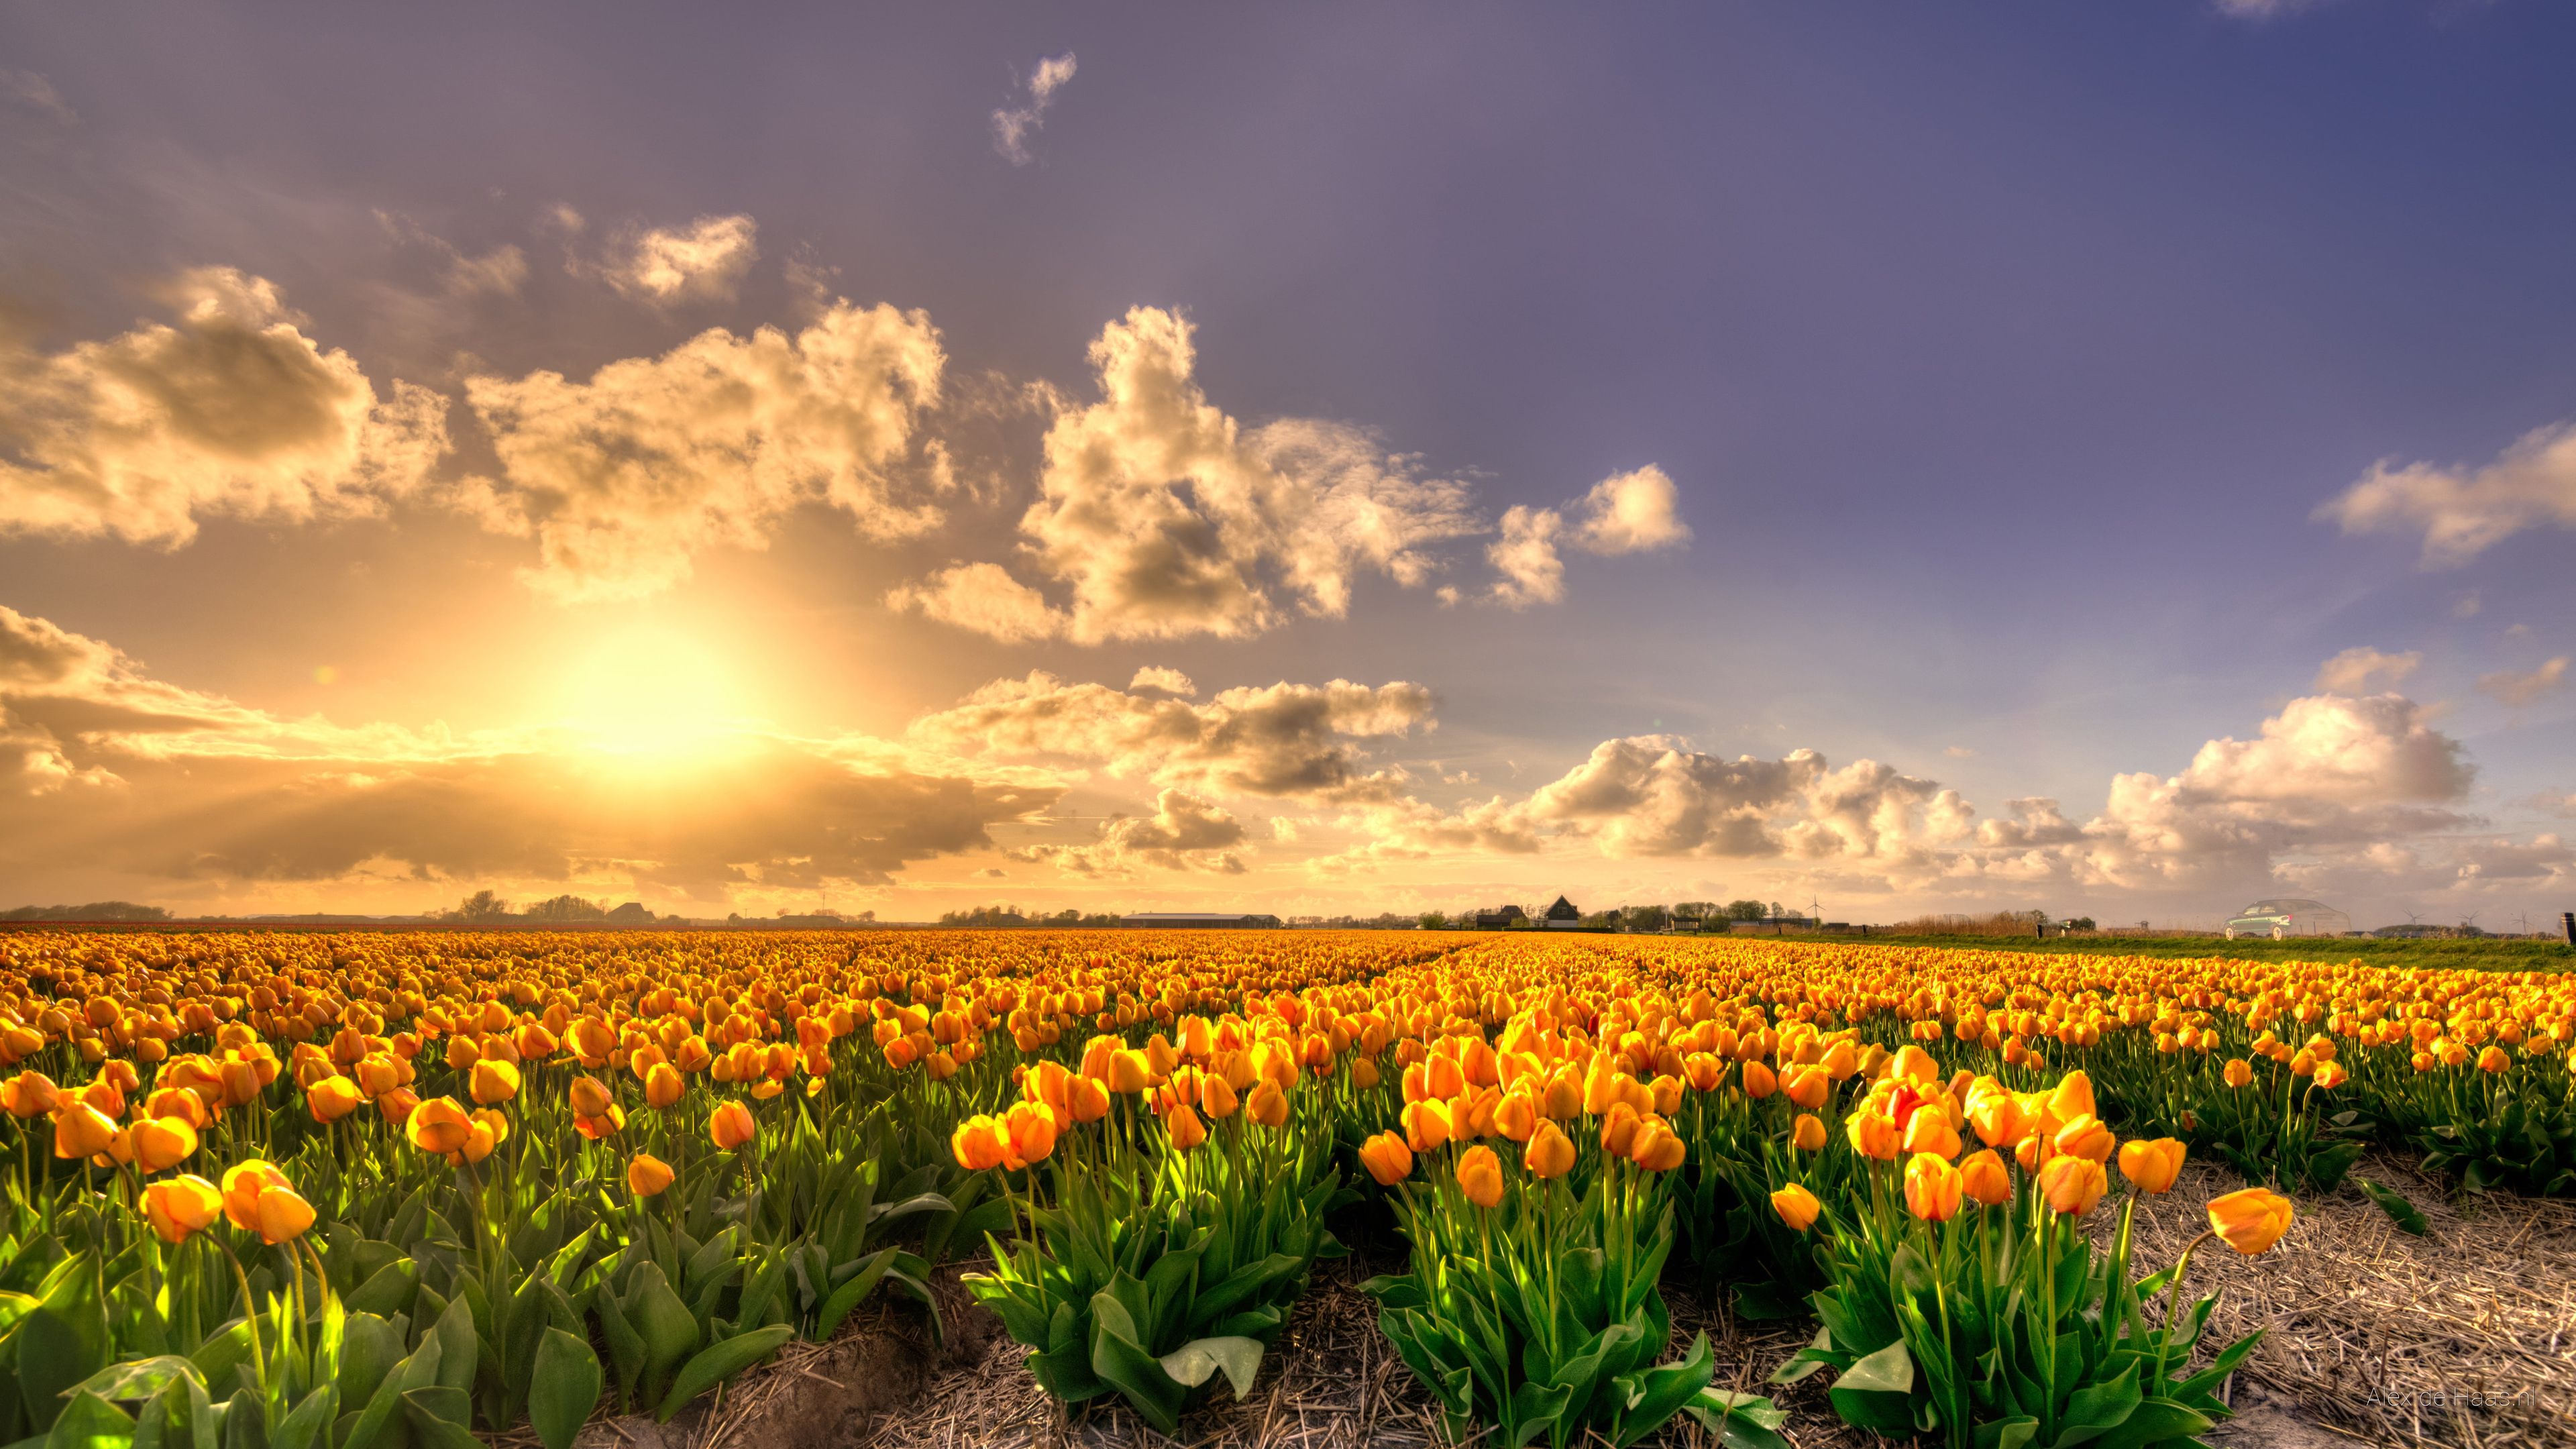 A field of yellow tulips with a blue sky and clouds in the background. - Tulip